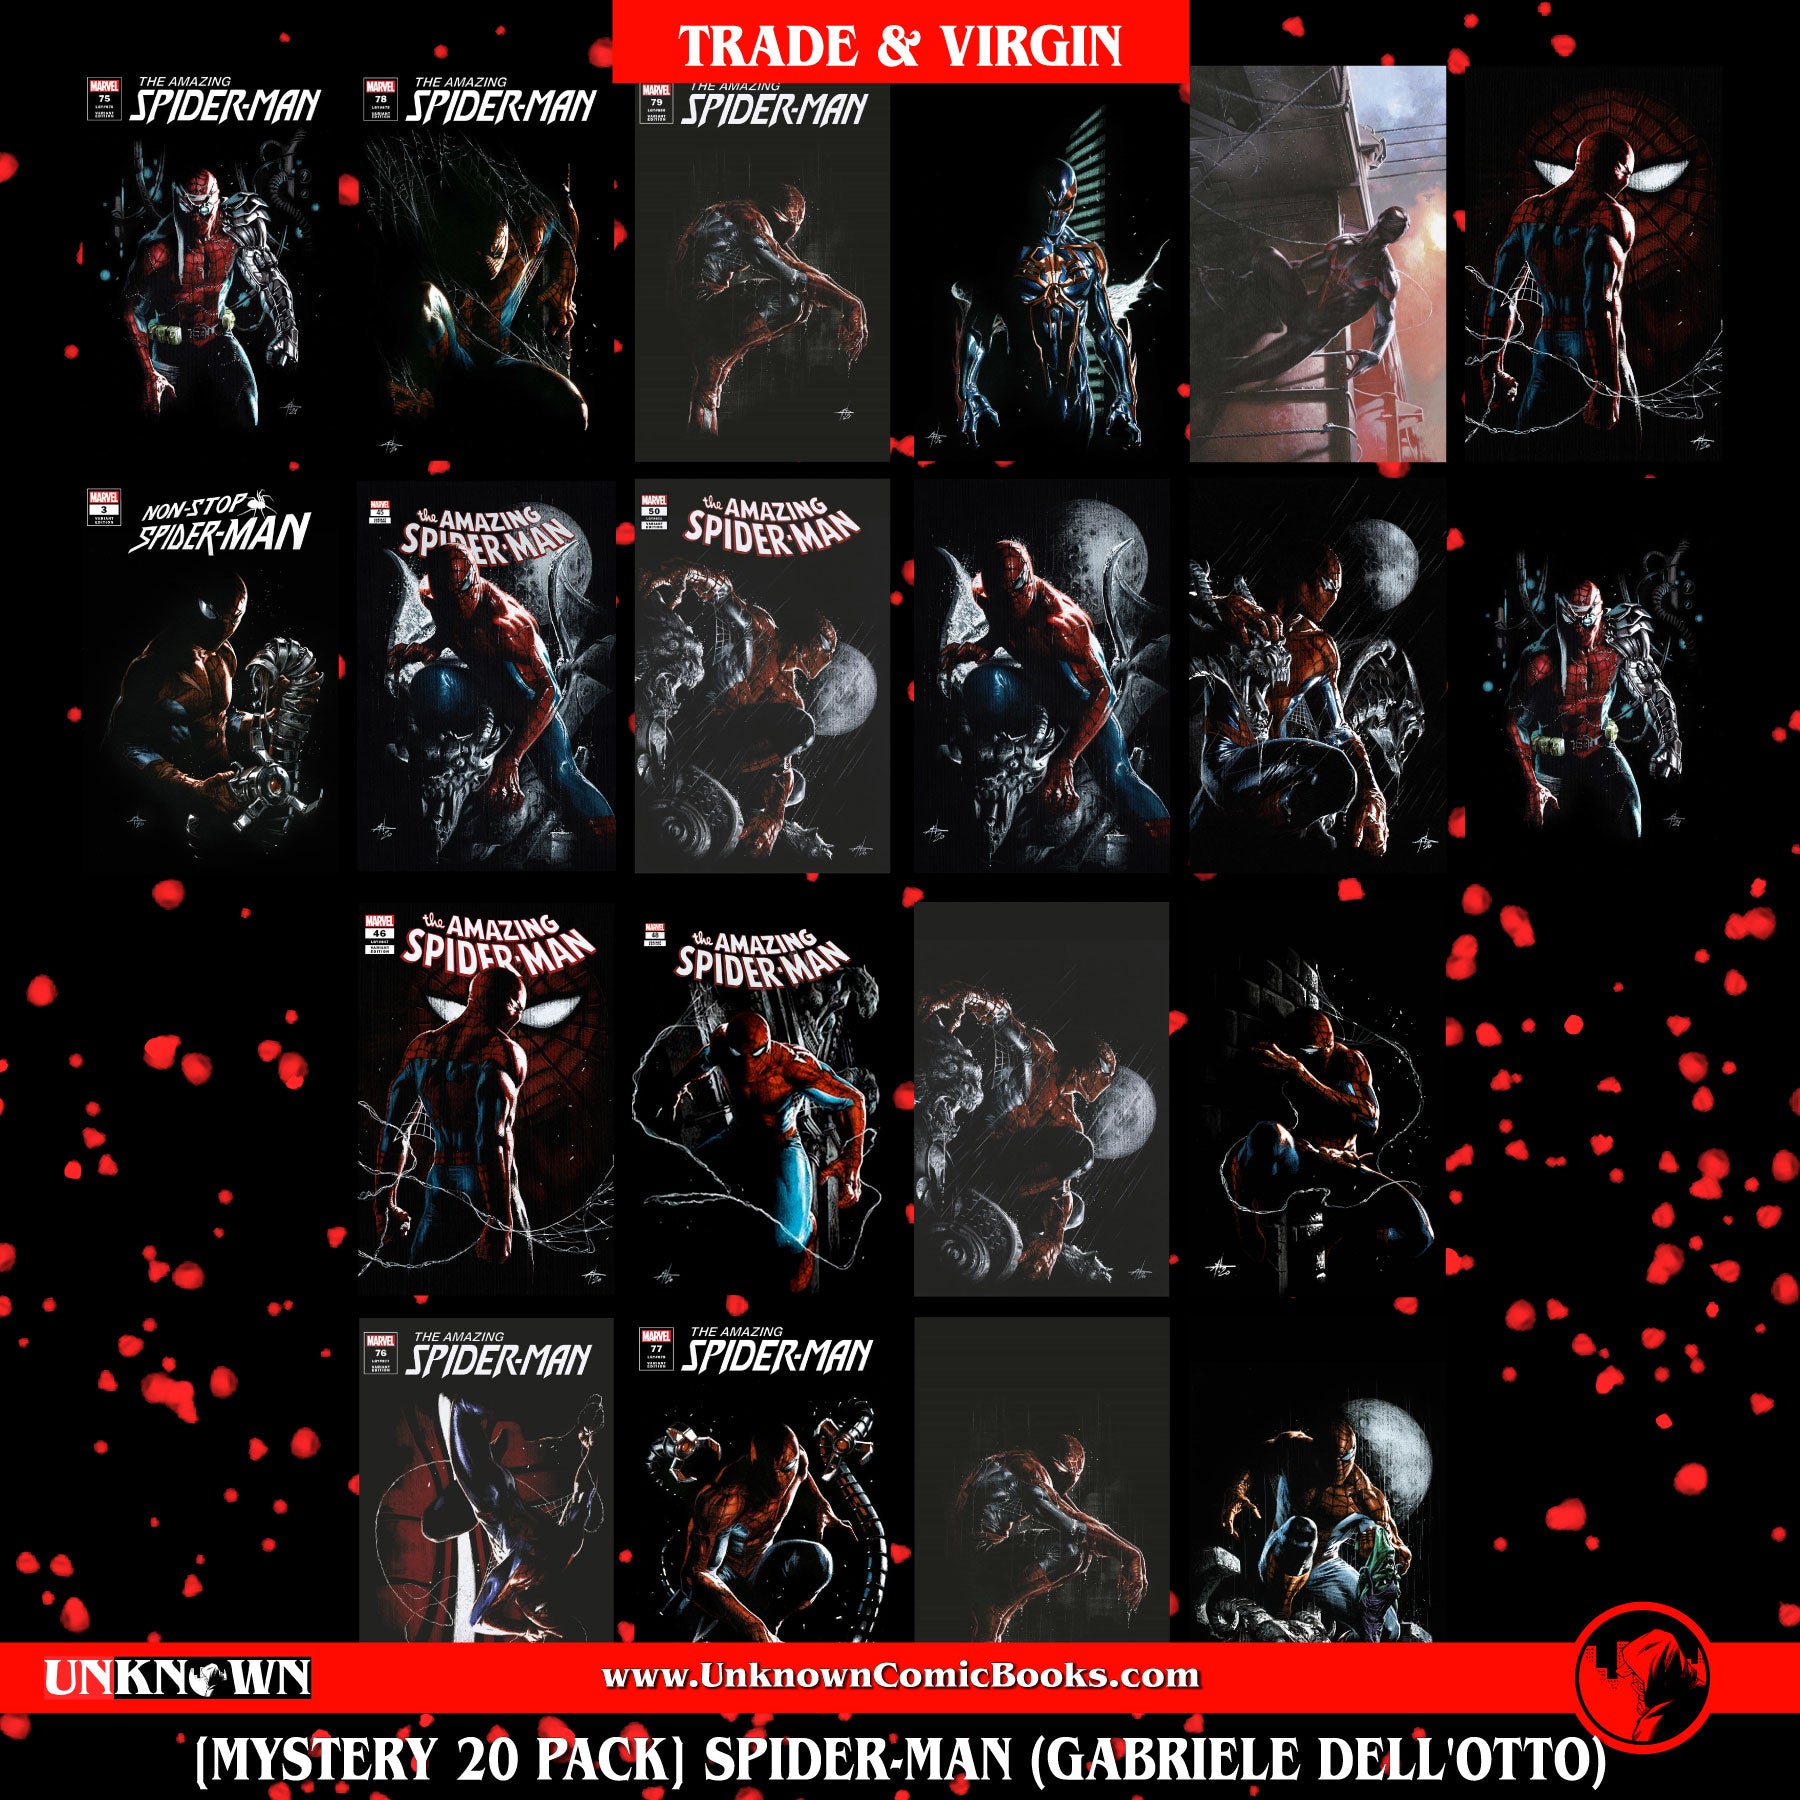 [MYSTERY 20 PACK TRADE & VIRGIN] SPIDER-MAN UNKNOWN COMICS GABRIELE DELL'OTTO EXCLUSIVE VAR BUNDLE (06/21/2023)